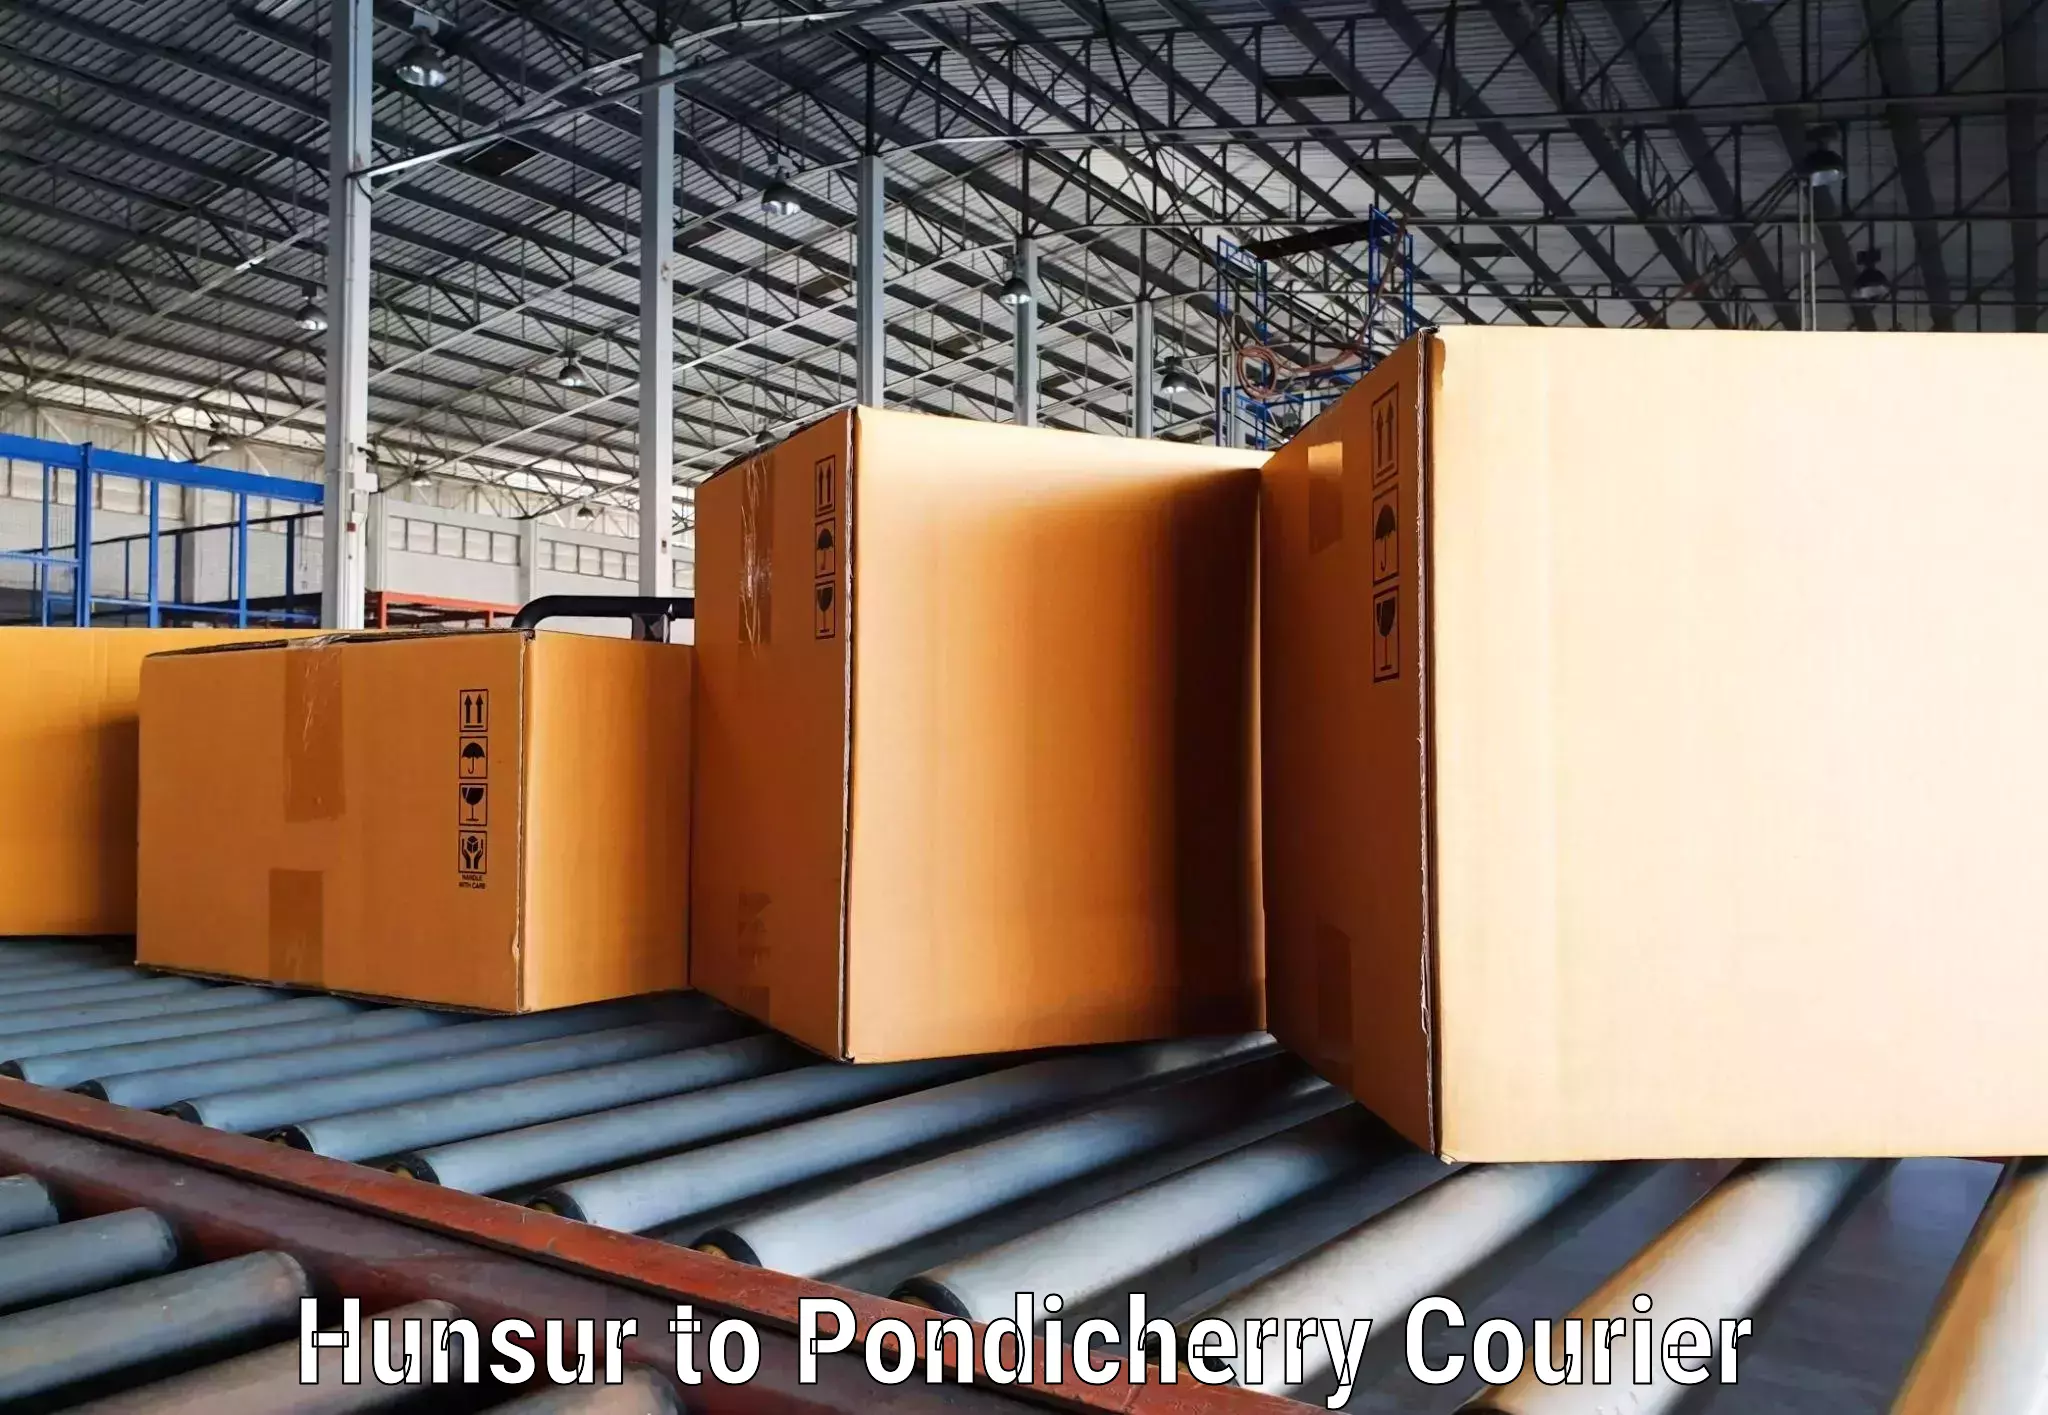 Tech-enabled shipping in Hunsur to Pondicherry